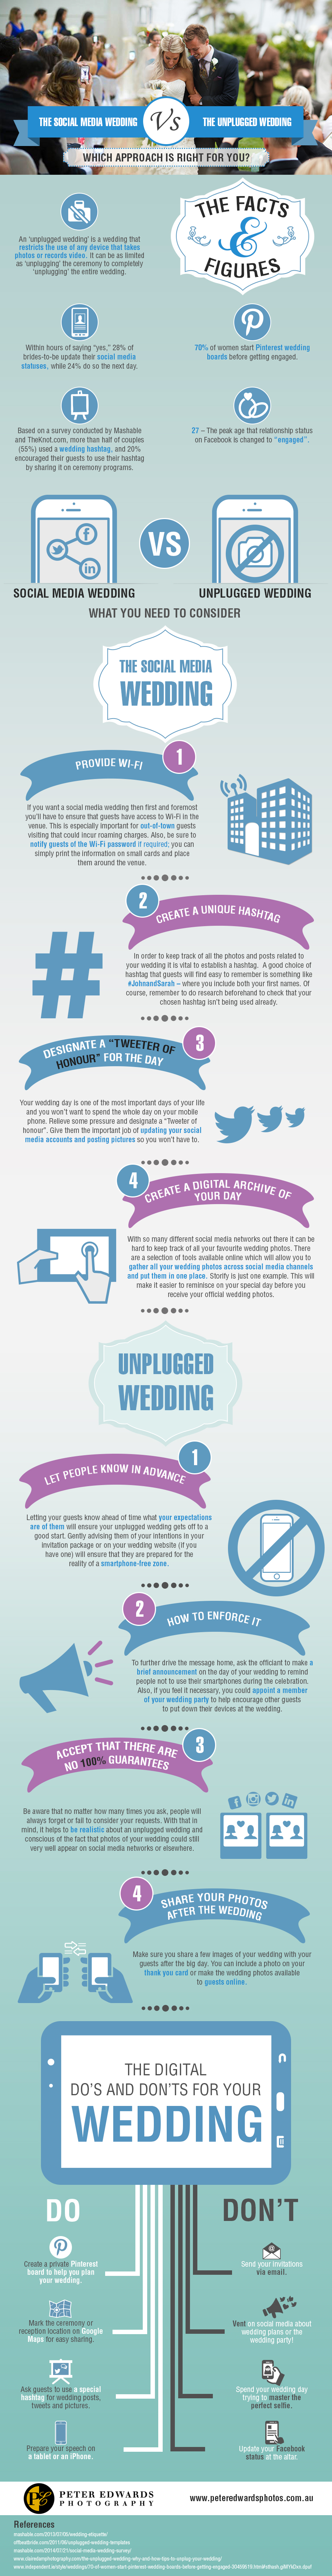 Social Media Weddings v/s Unplugged Weddings: Which Approach is Right for You?